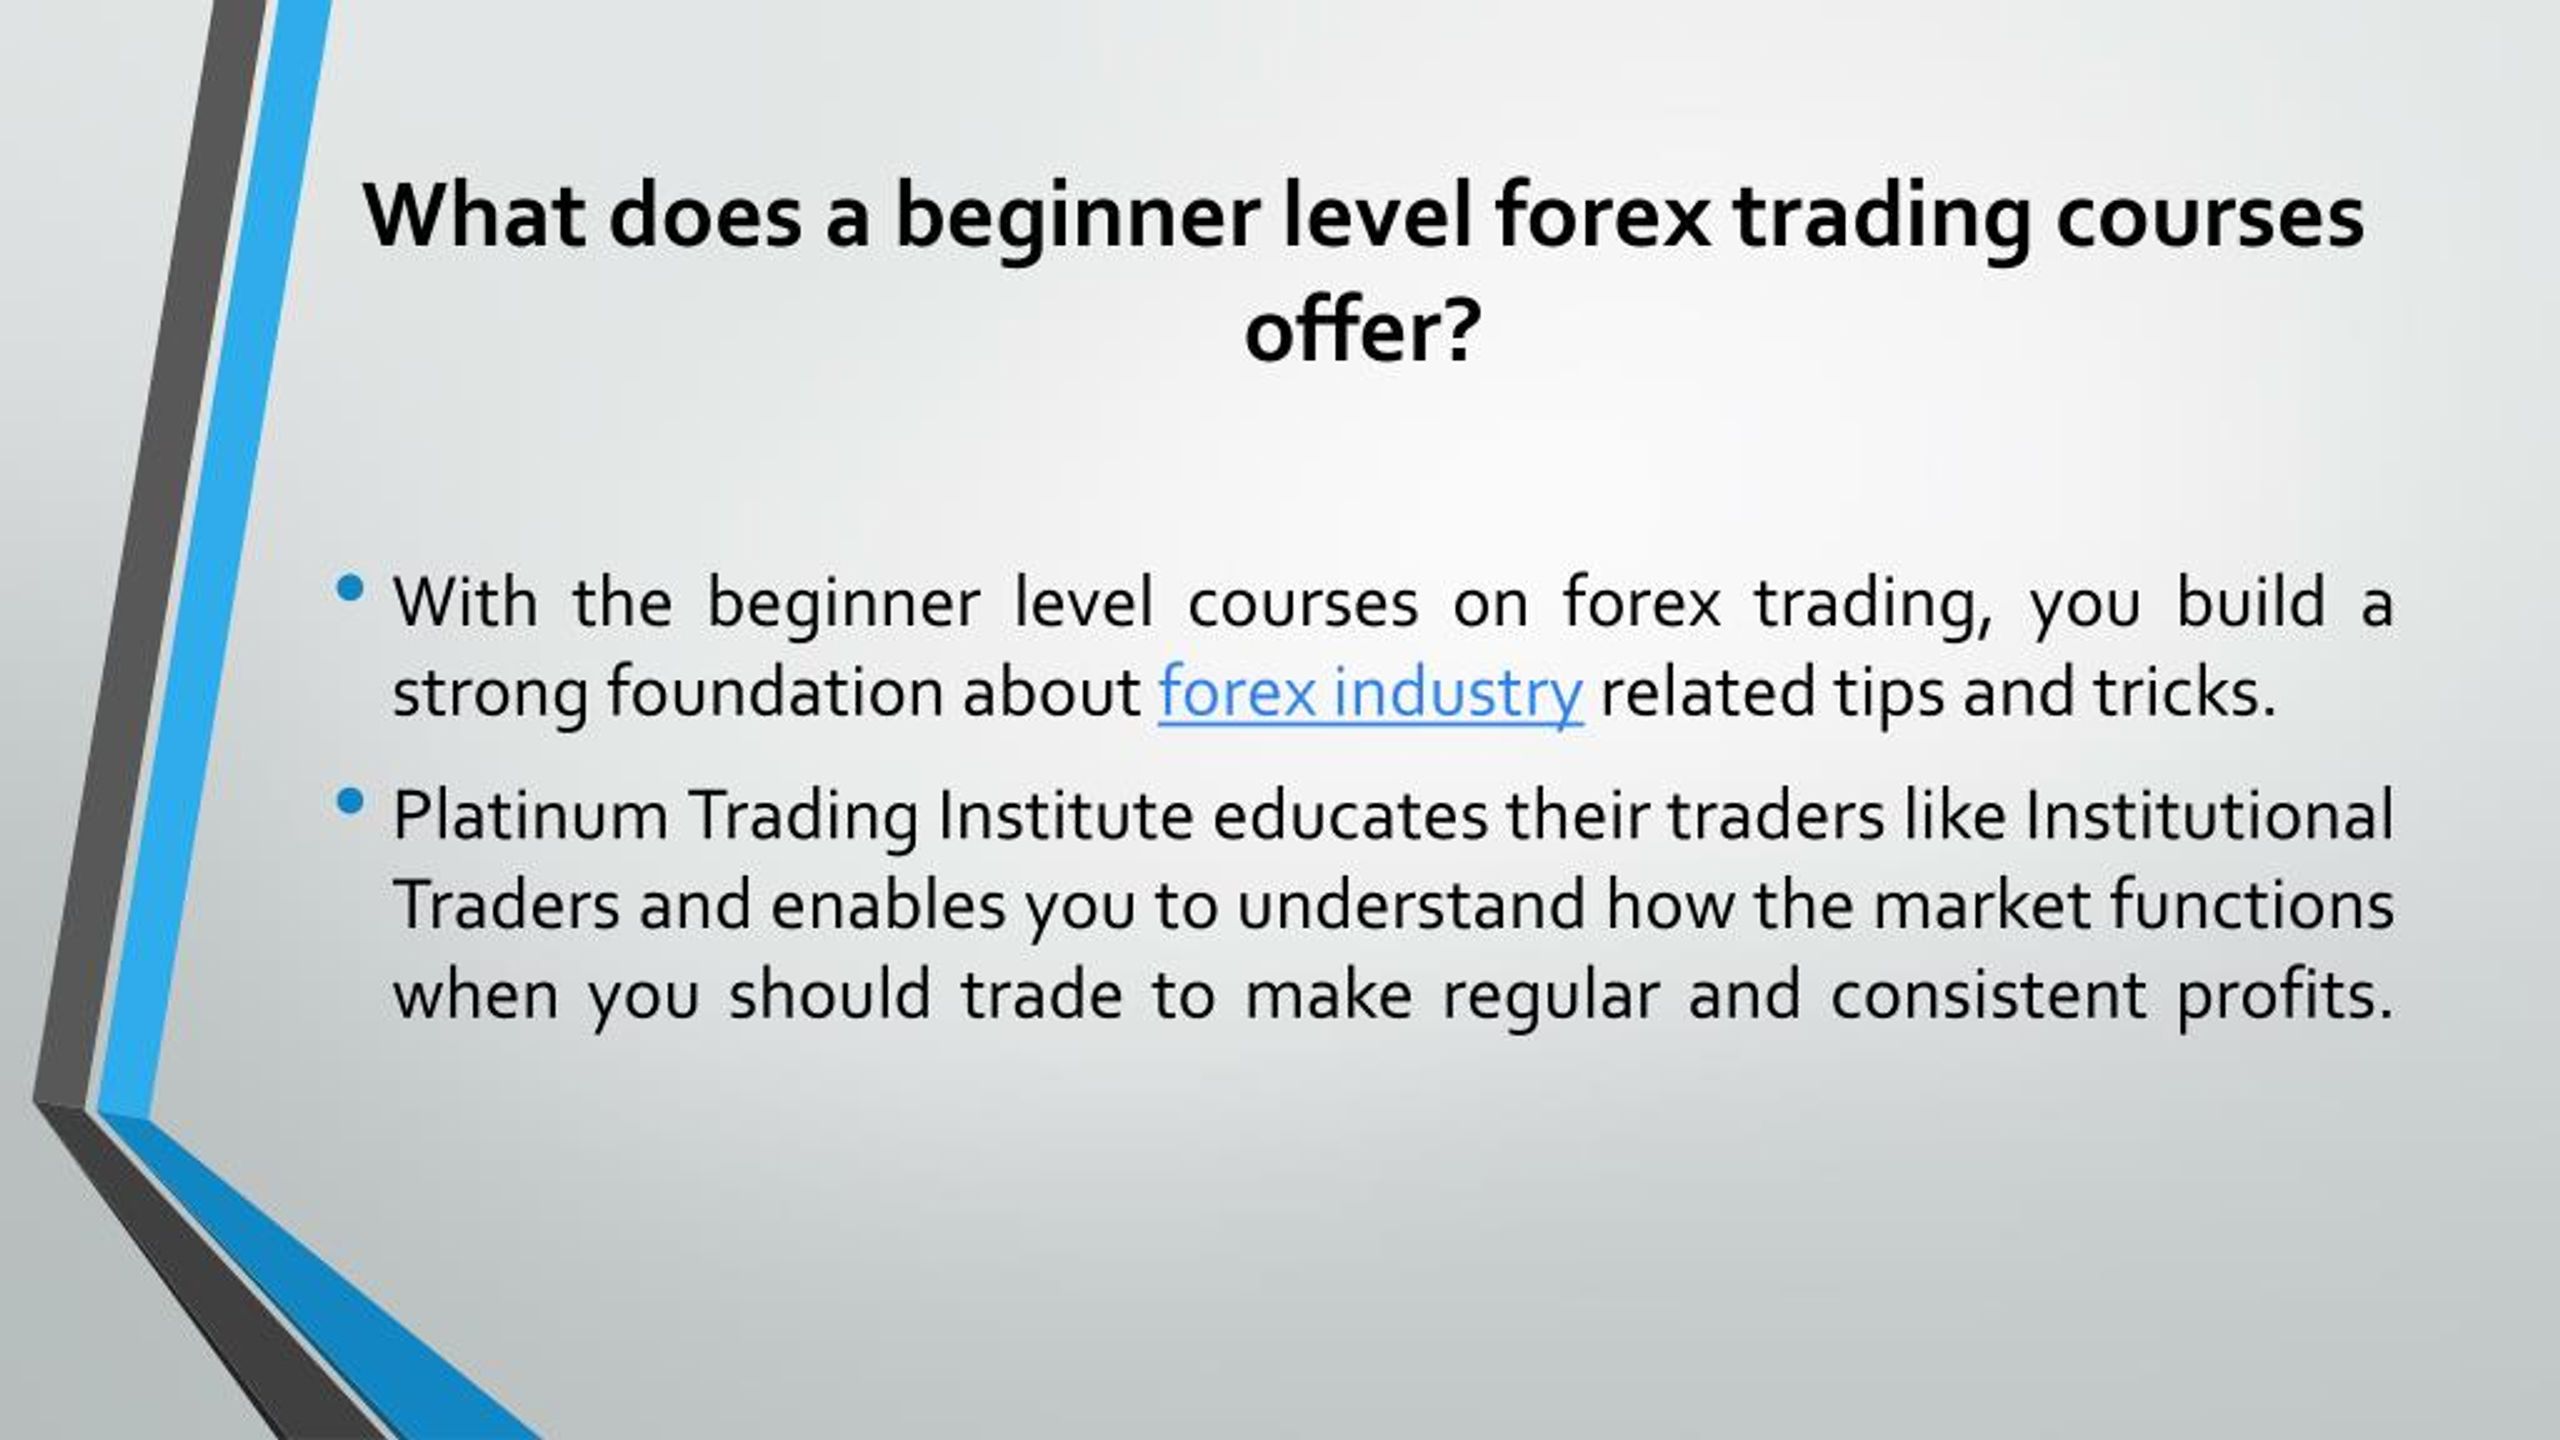 Forex trading course beginners